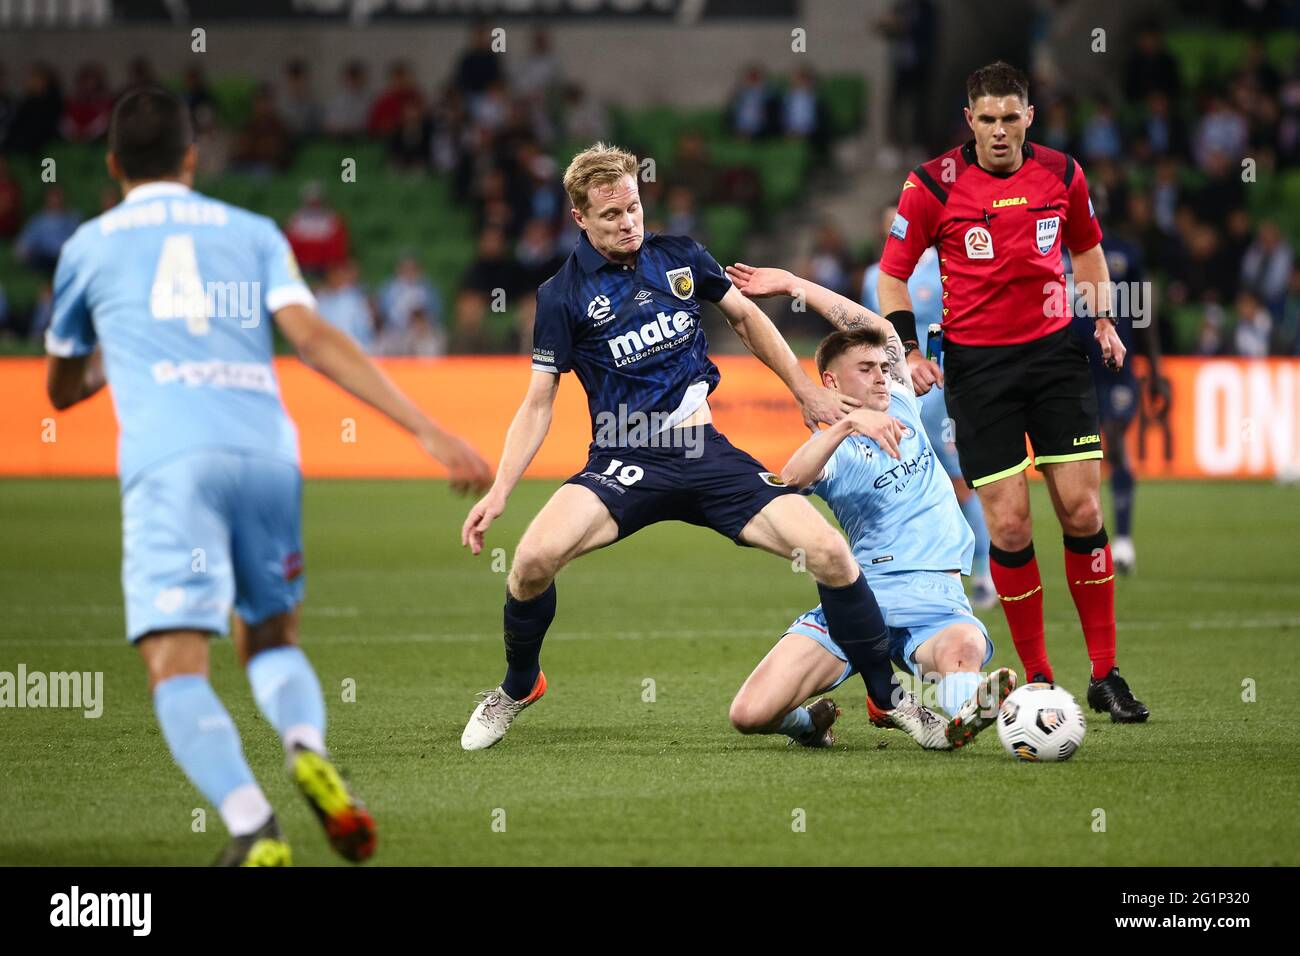 MELBOURNE, AUSTRALIA - MAY 22: Matt Simon of the Central Coast Mariners  controls the ball ahead of Connor Metcalfe of Melbourne City during the  Hyundai A-League soccer match between Melbourne City FC